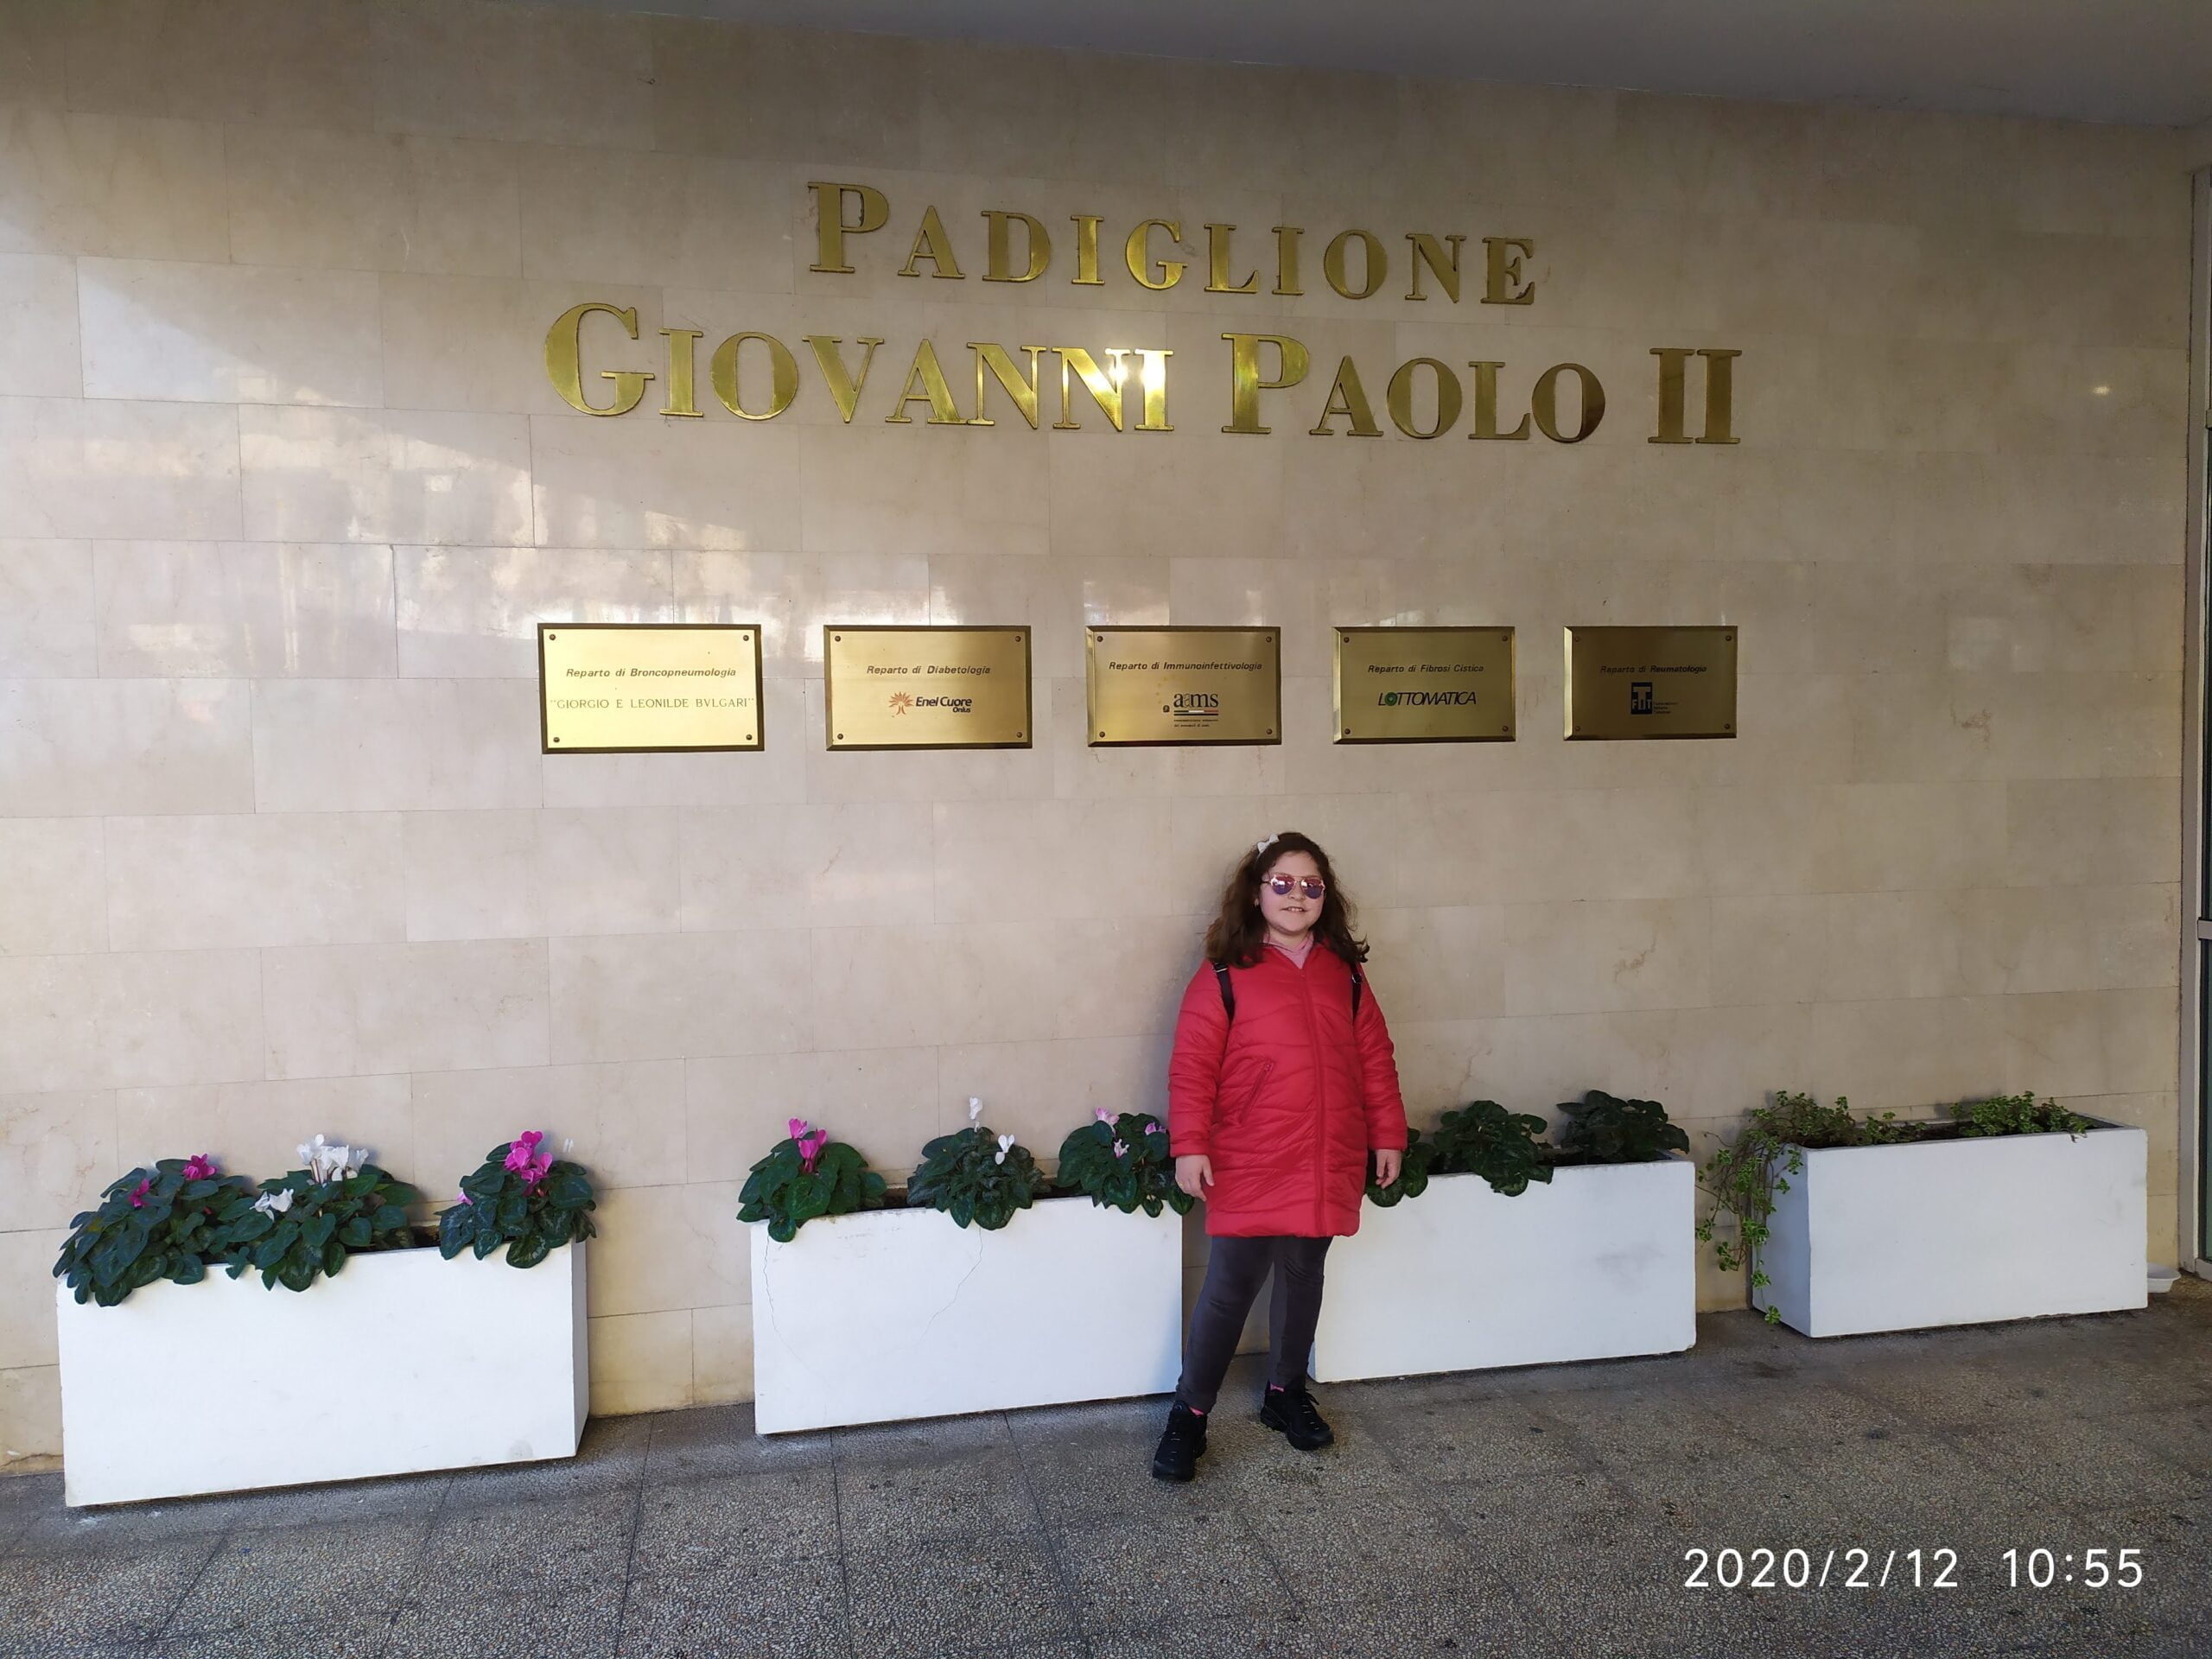 Francesca in front of the entrance to the John Paul II pavilion at OPBG